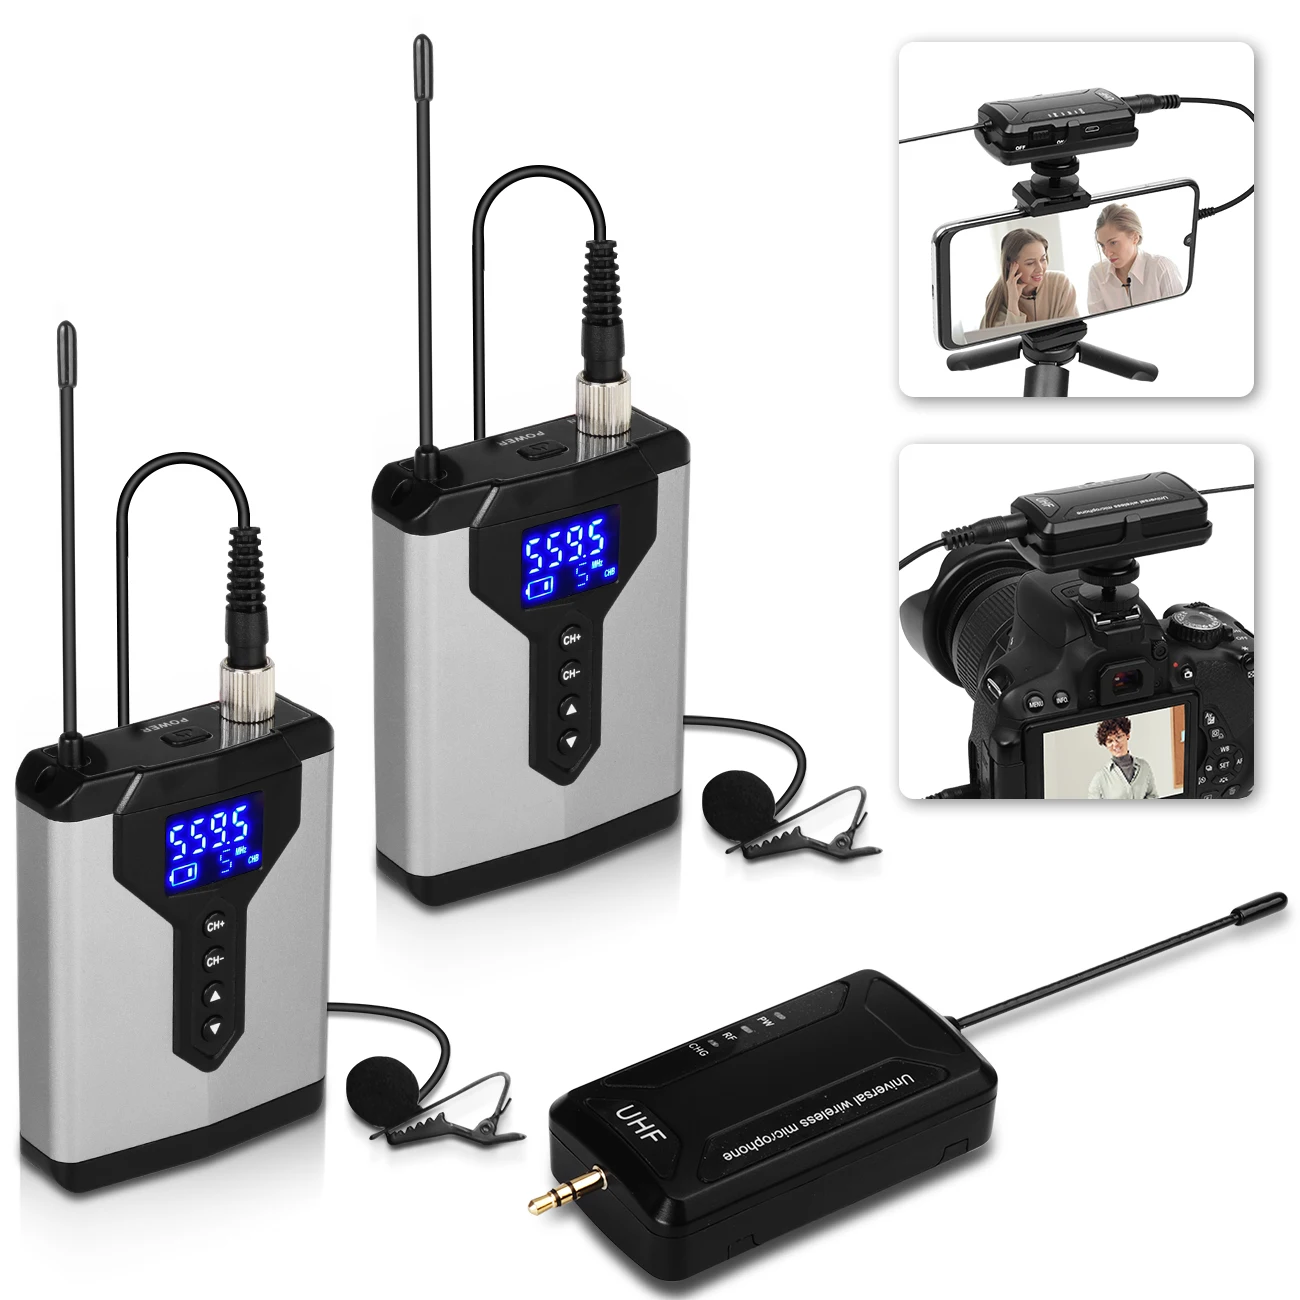 

Audio DV UHF Wireless Lavalier Microphone with Audio Monitor 50M Range For Phones DSLR Cameras Live Recording Interview